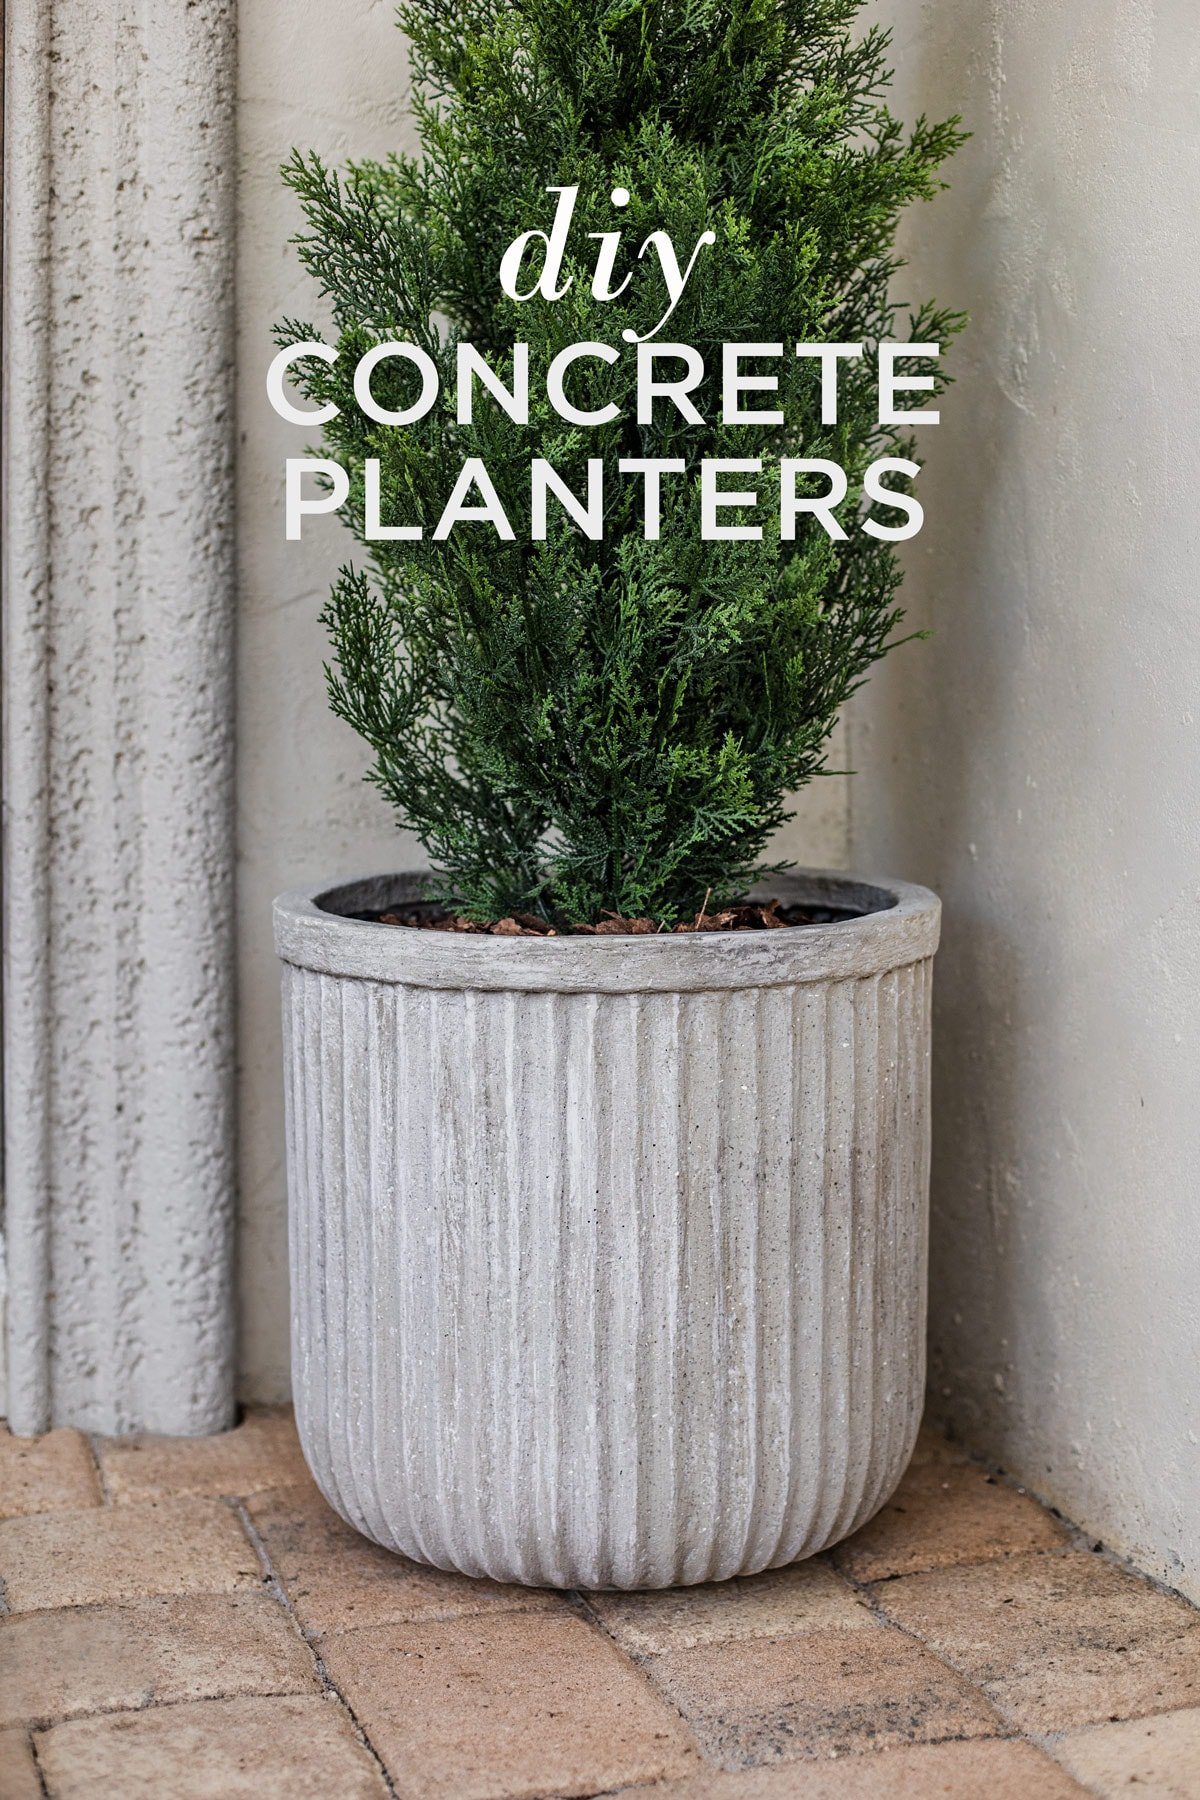 PLANTARA 24 in. H Tall Concrete Planter (Set of 2), Large Outdoor